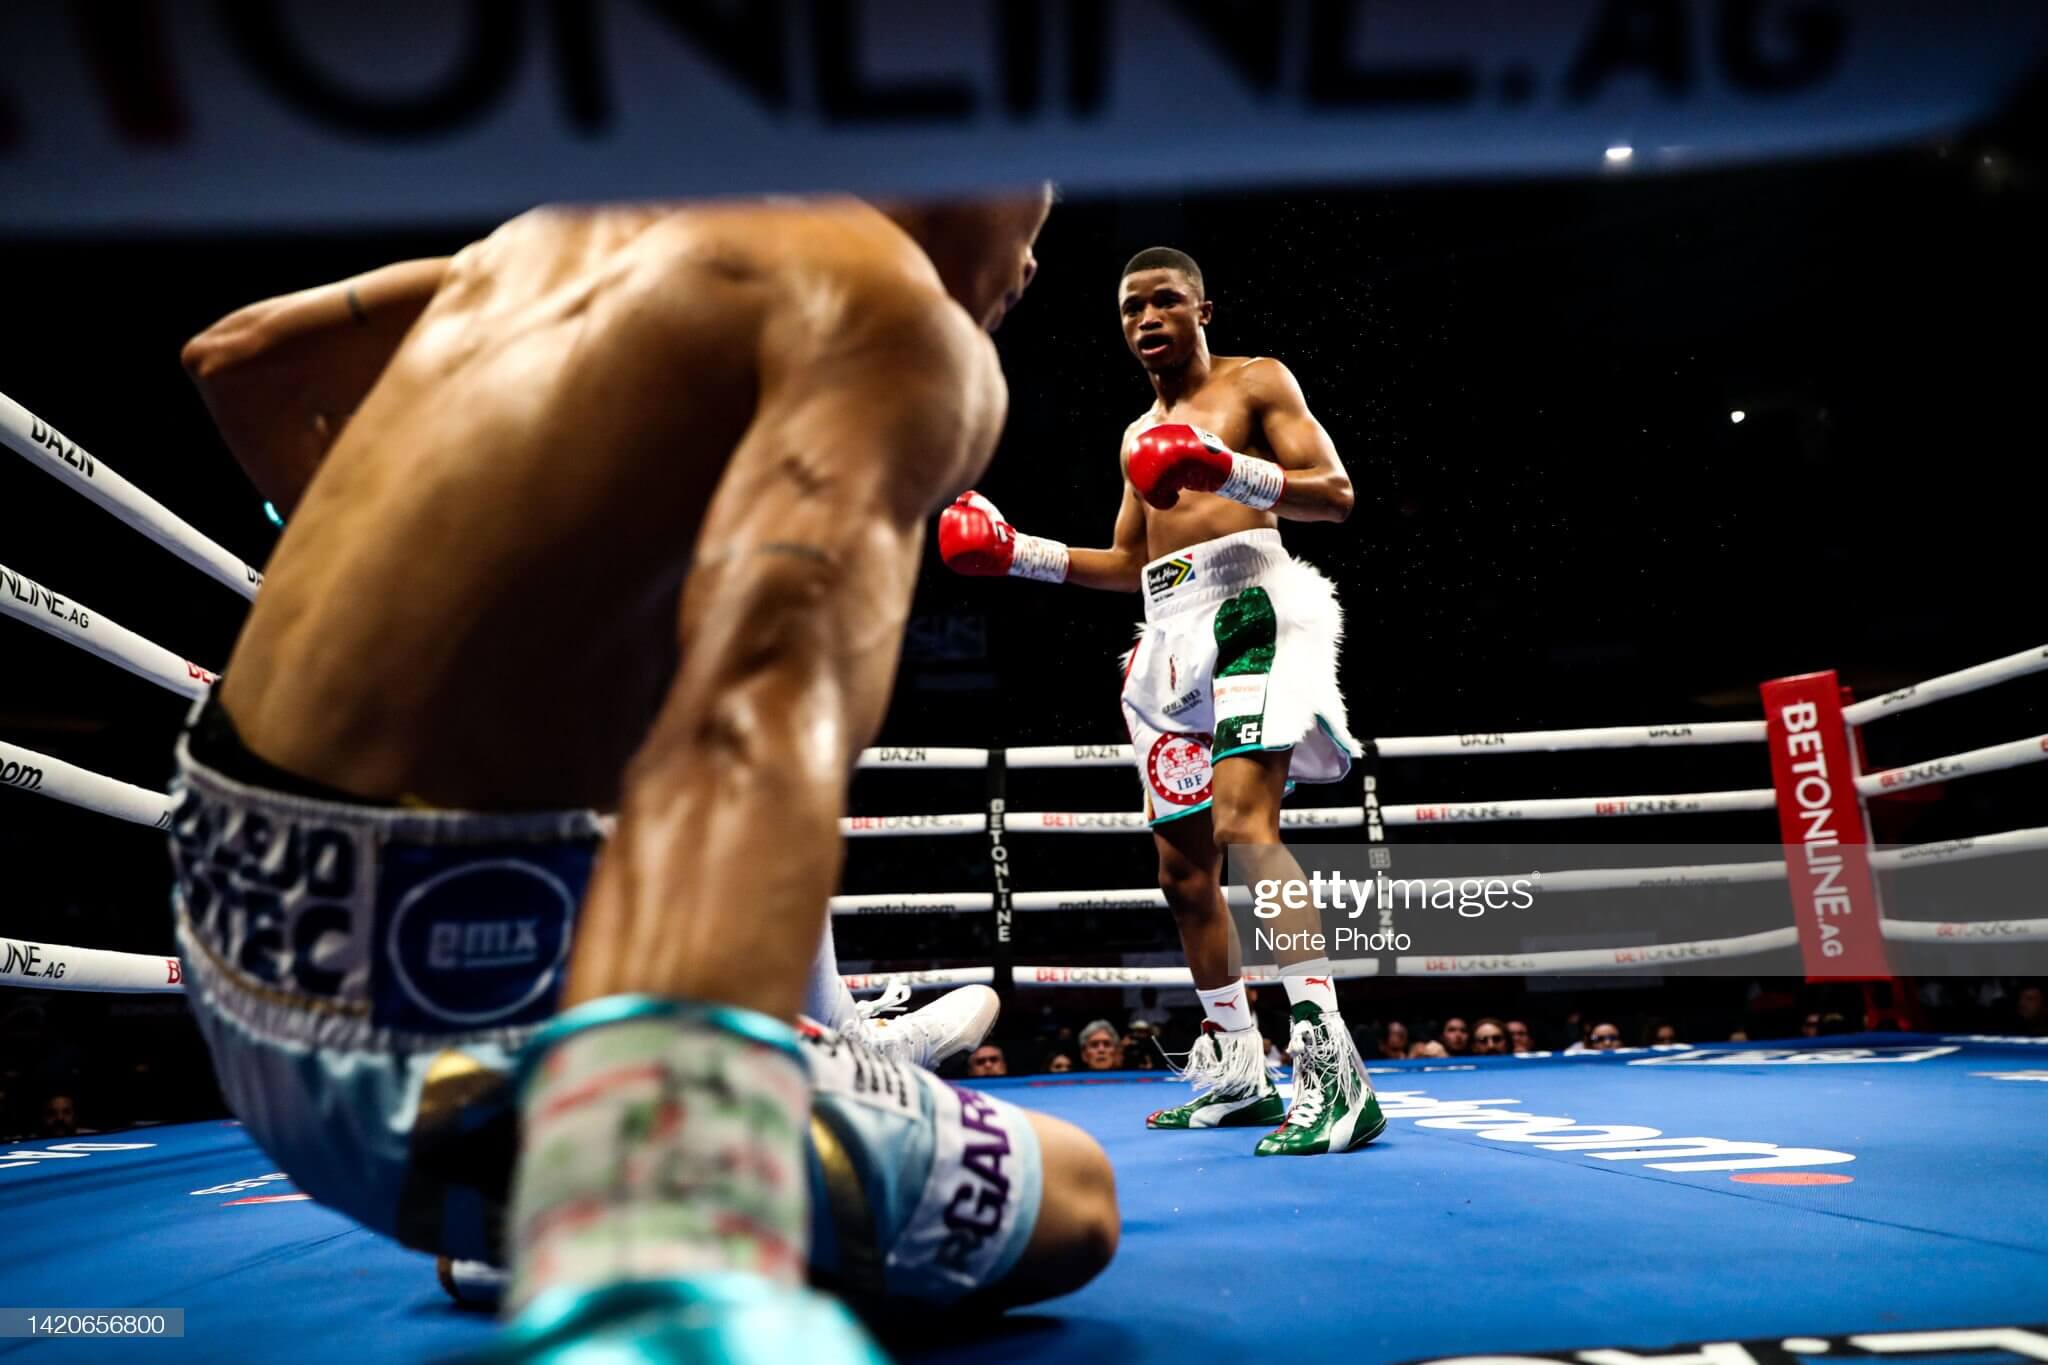 How Sivenathi Nontshinga Became A Legend After His Fight With Hector Flores